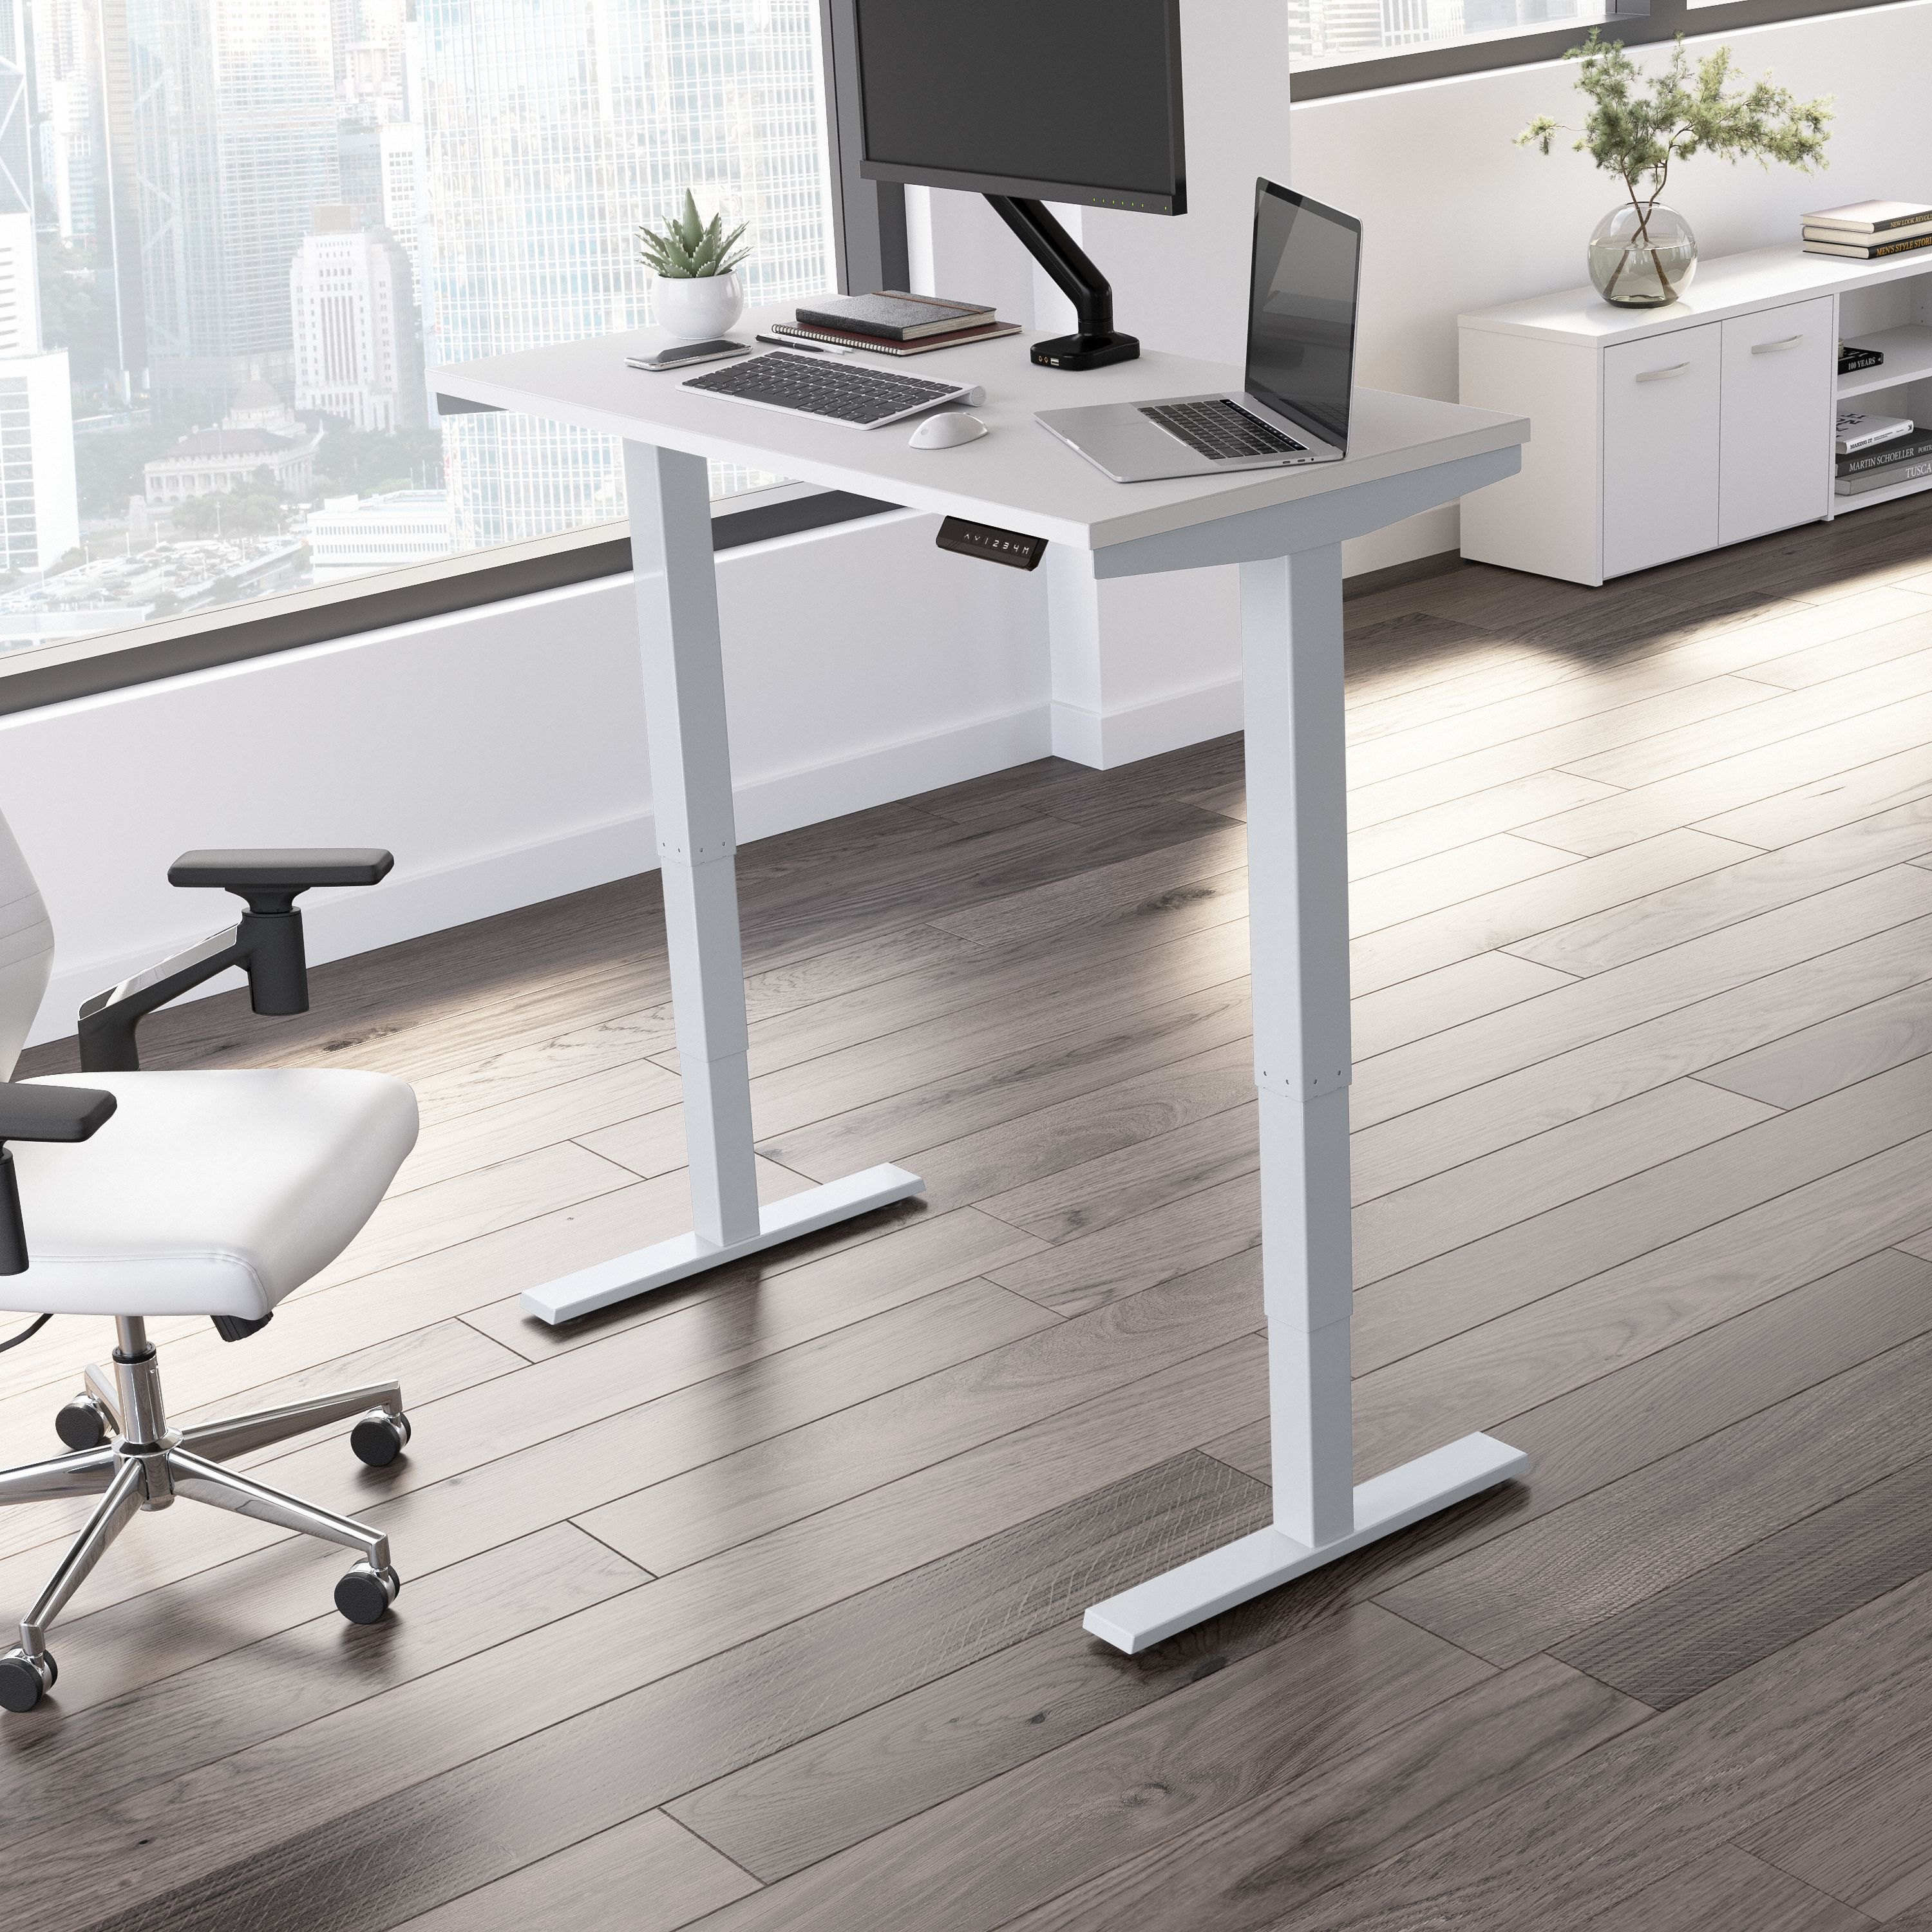 Shop Move 40 Series by Bush Business Furniture 48W x 24D Electric Height Adjustable Standing Desk 01 M4S4824WHSK #color_white/cool gray metallic